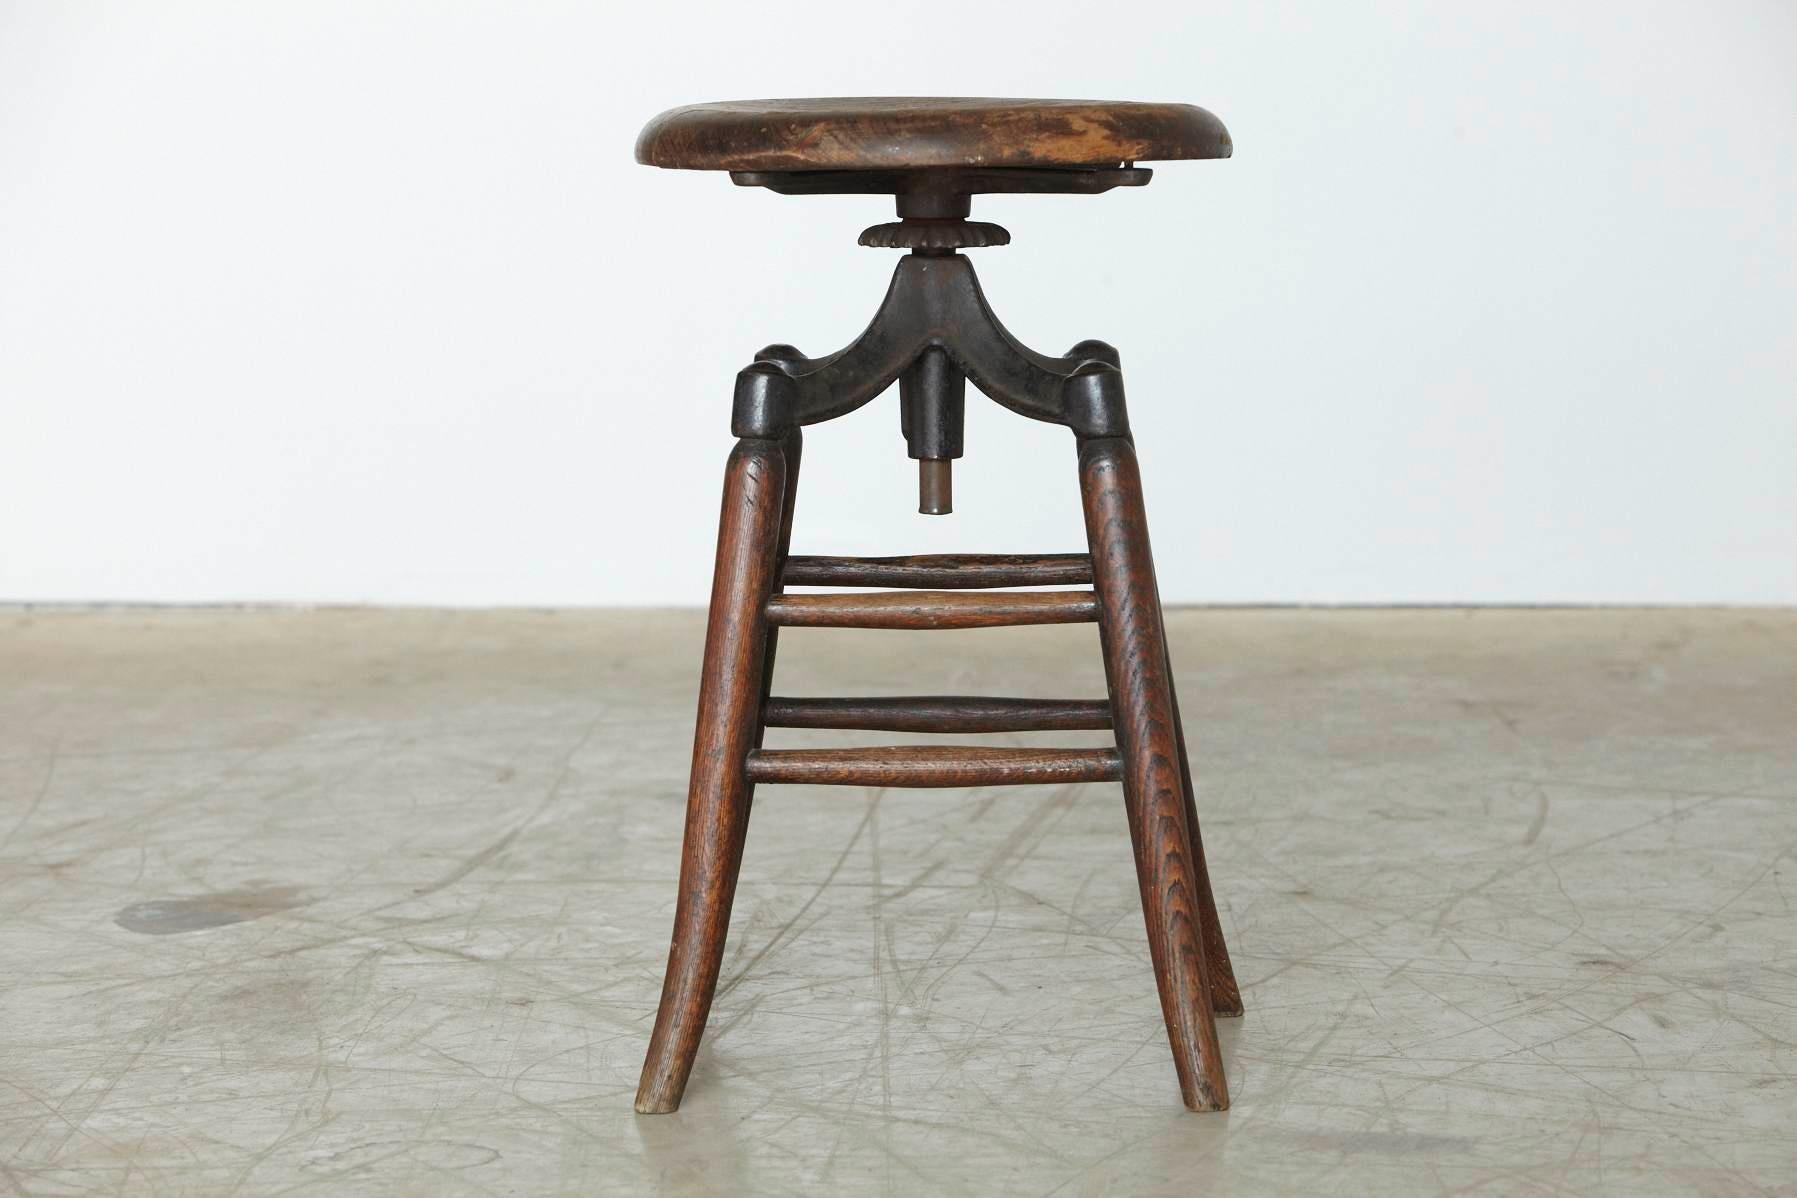 A strongly build industrial solid oak and iron work shop stool, with great patina, circa 1940s.
Measurements: W 13 x D 13 x H 22 - diameter seat 14, all in inches.